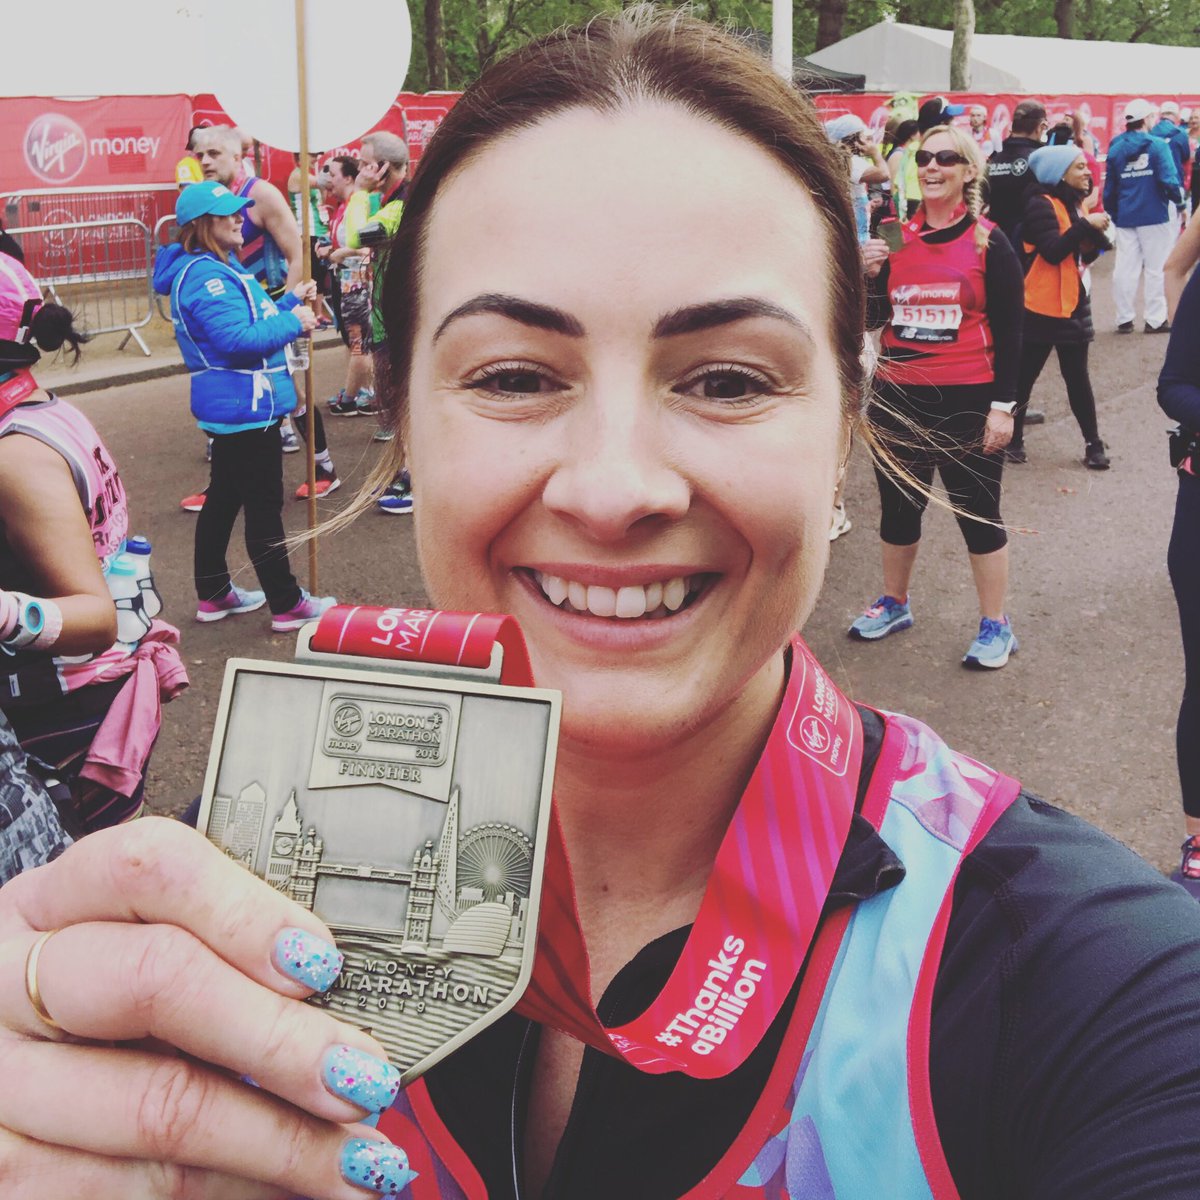 I did it!!! It was bloomin hard but I loved it! Thank you to everyone who has supported me - we’ve raised over £2600 for @DementiaRev 😍😍😍 #londonmarathon2019 @LondonMarathon #DementiaRevolution